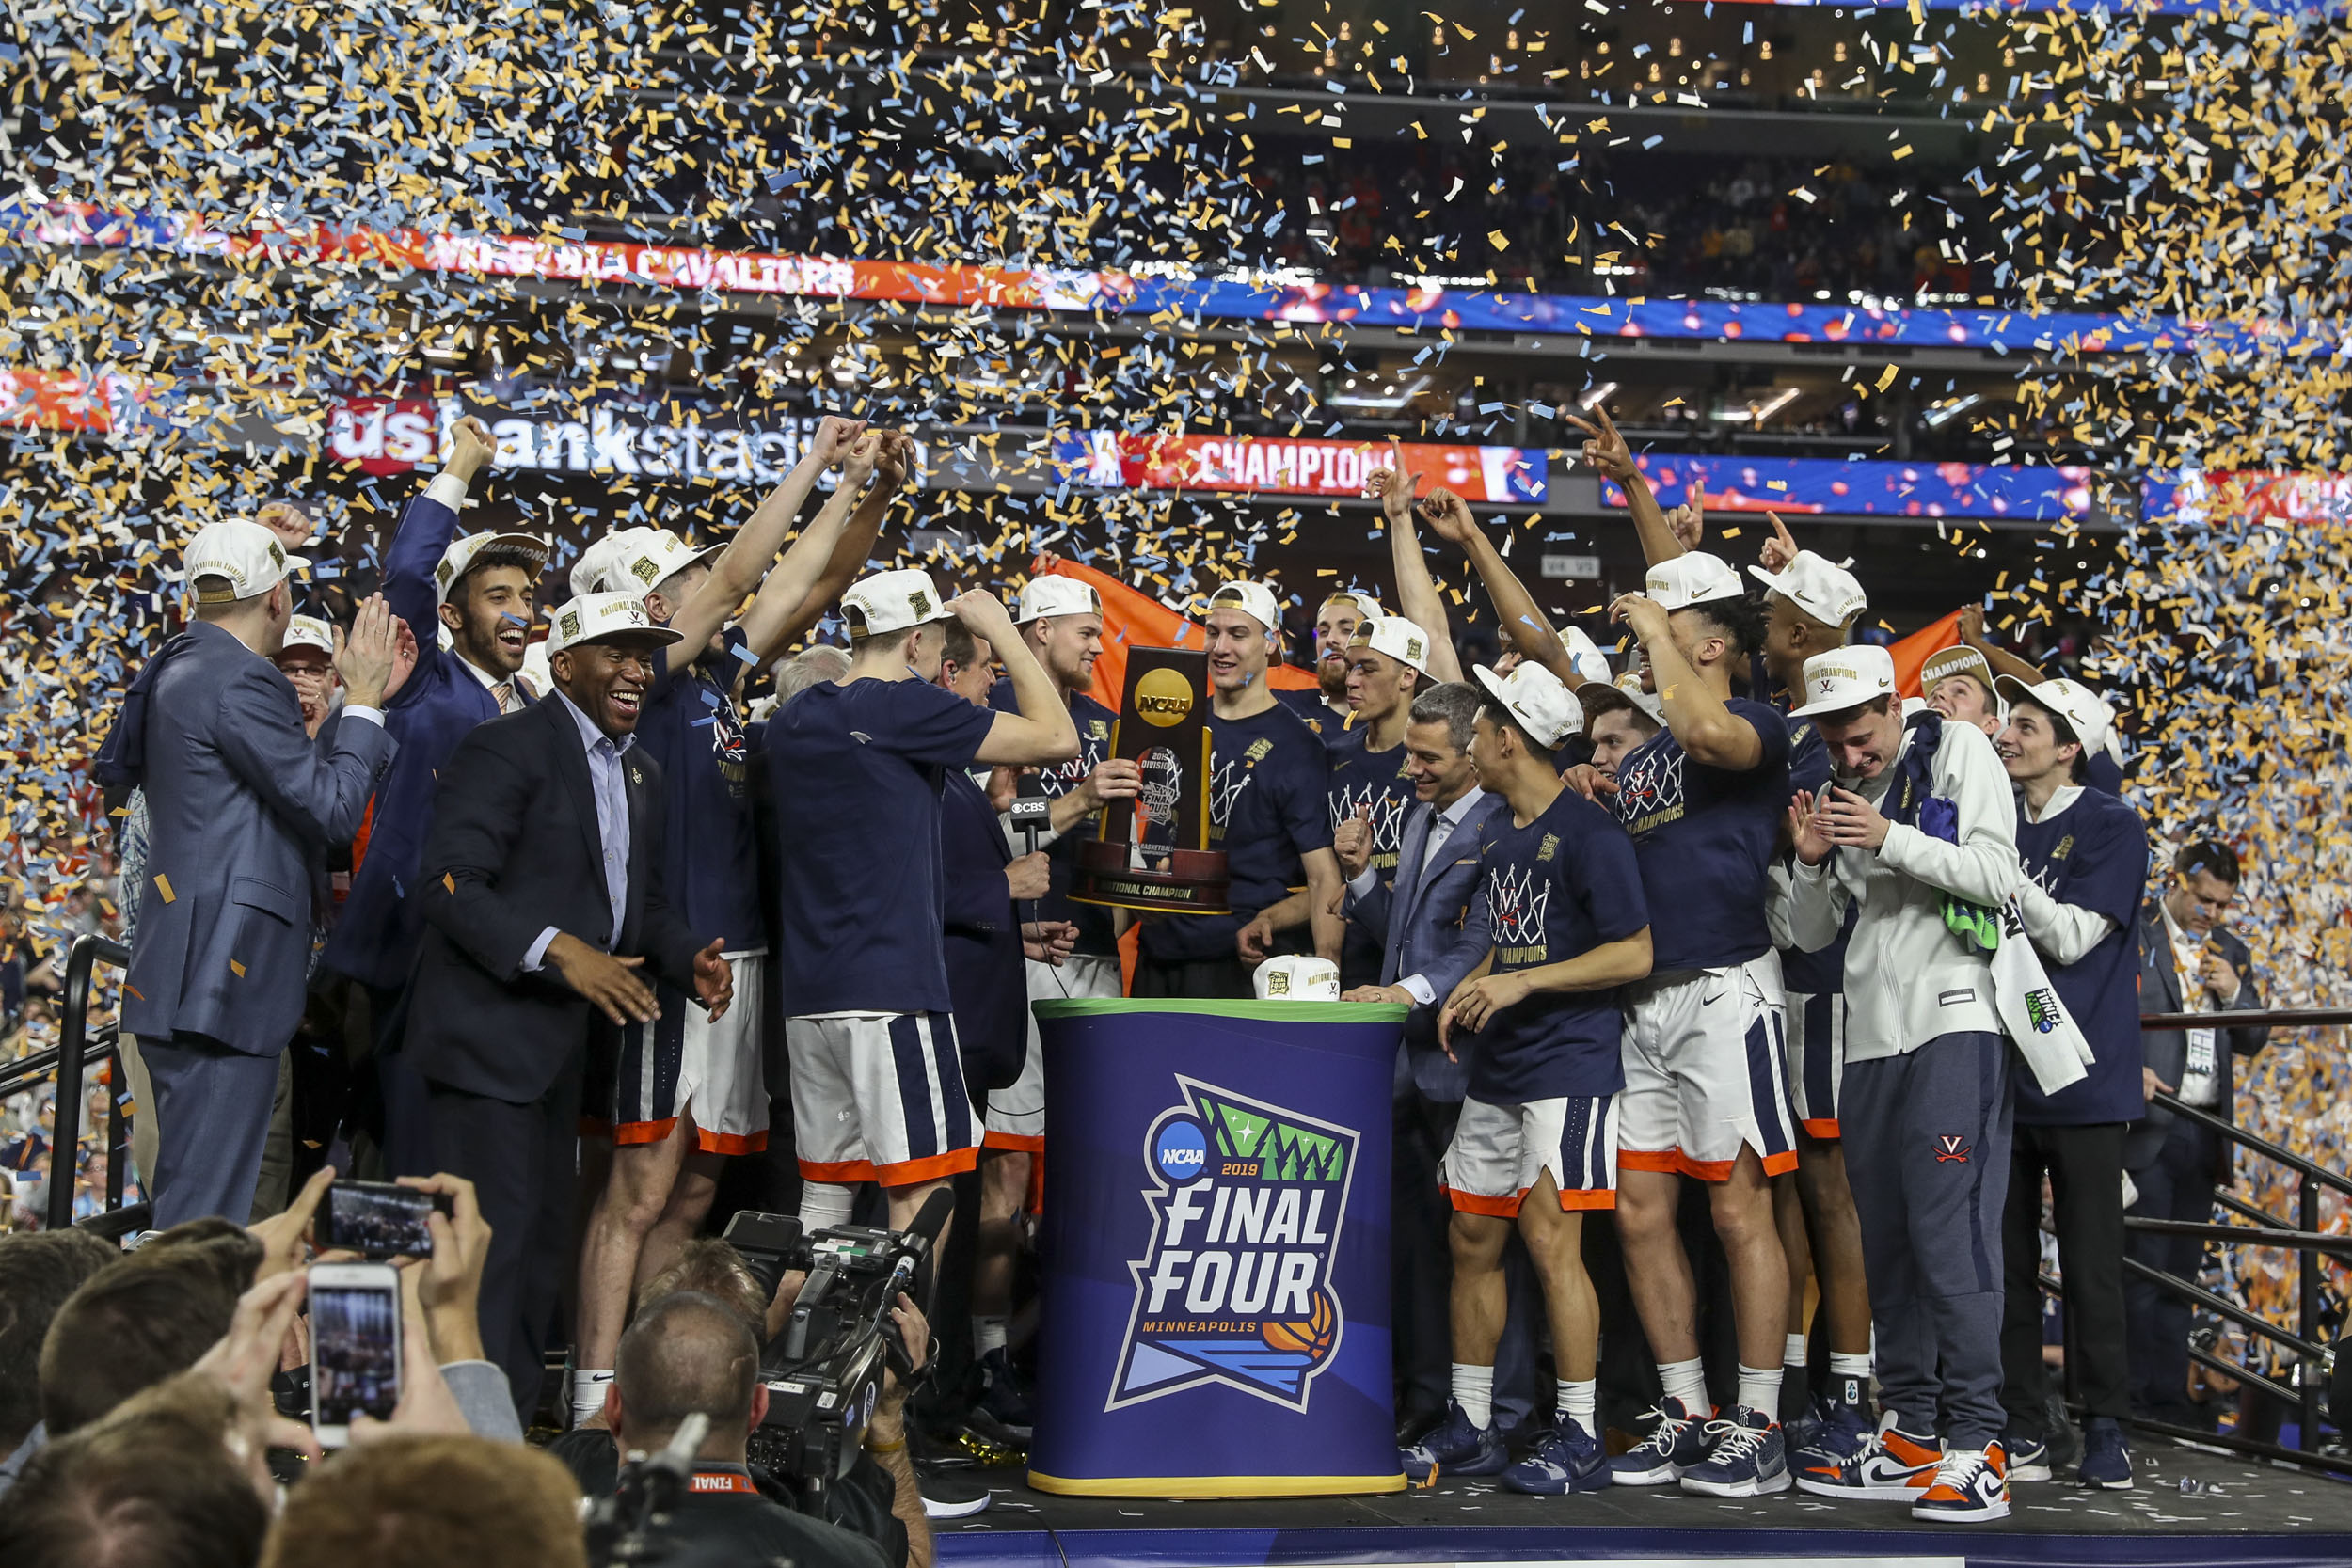 Mens Basketball team on stage holding the NCAA trophy while confetti falls from the sky